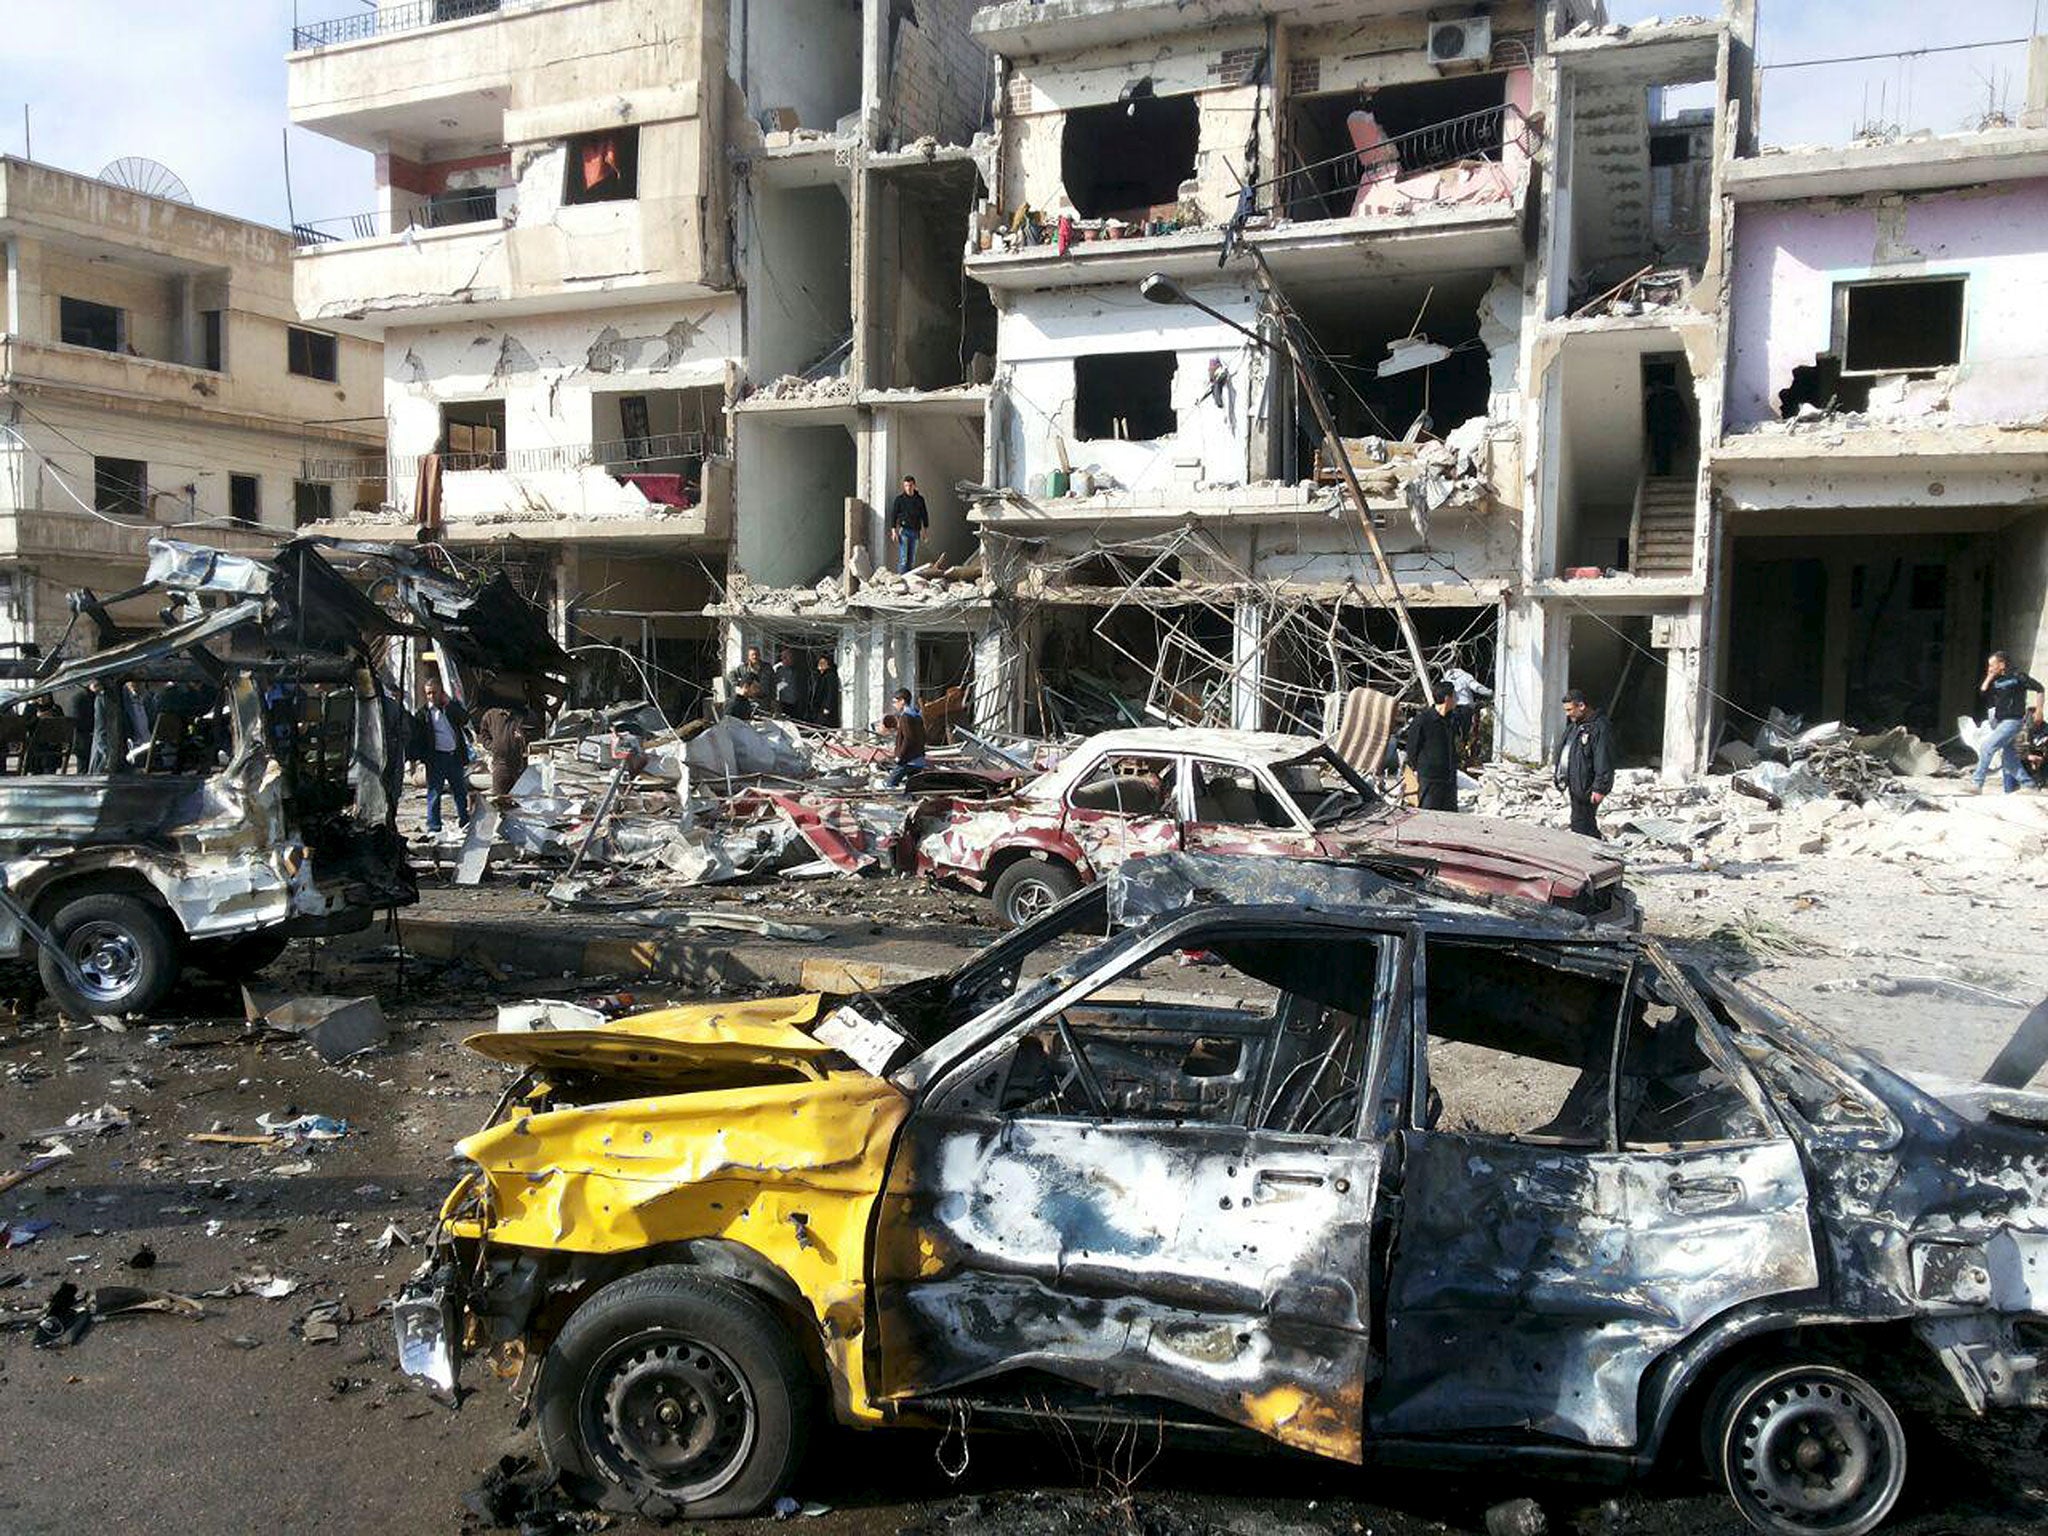 People inspect the site of a two bomb blasts in the government-controlled city of Homs, Syria, on 21 February, 2016